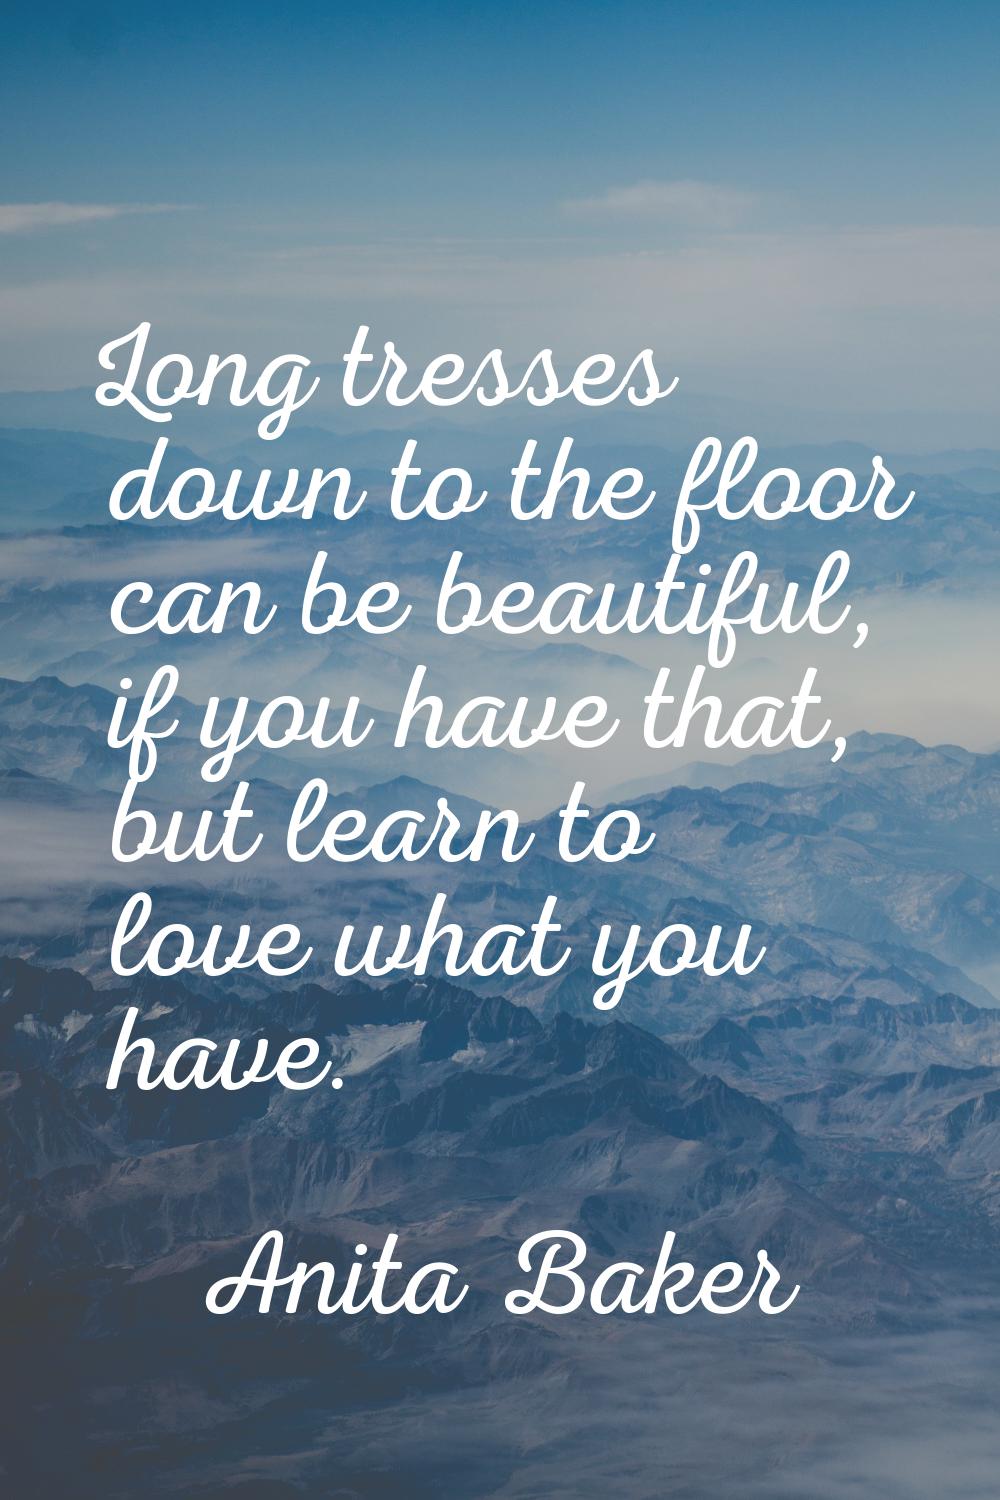 Long tresses down to the floor can be beautiful, if you have that, but learn to love what you have.